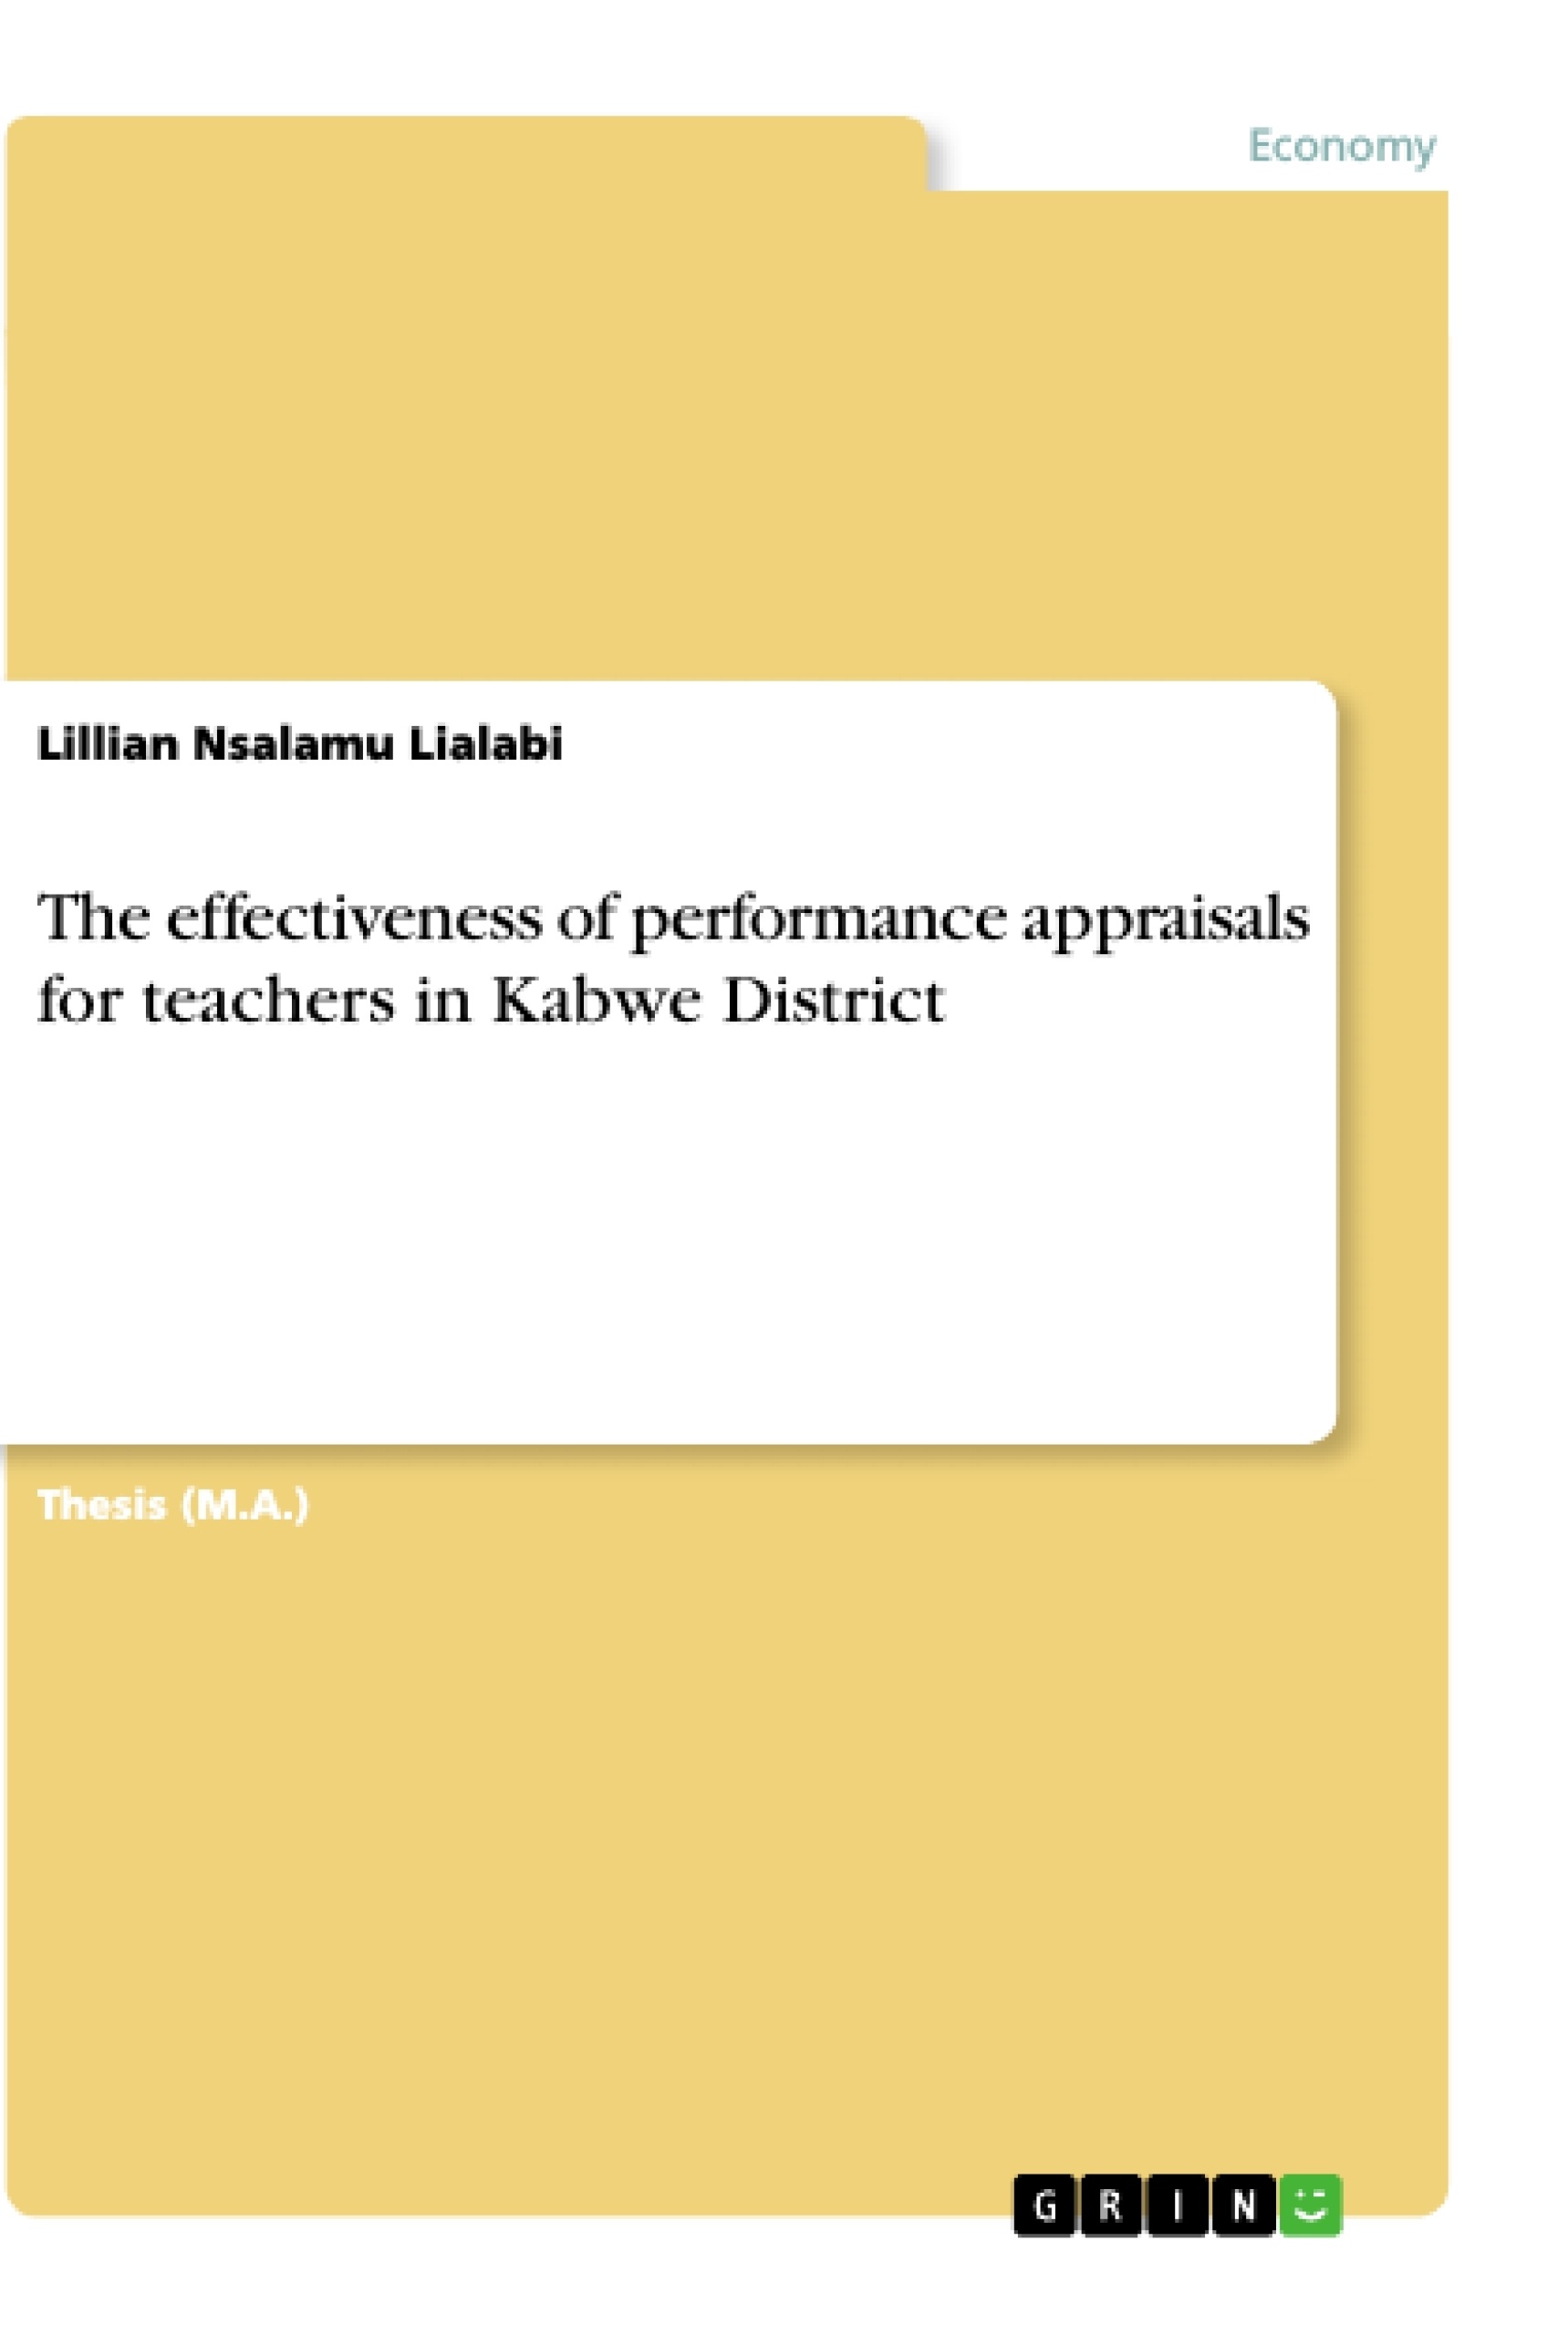 Title: The effectiveness of performance appraisals for teachers in Kabwe District